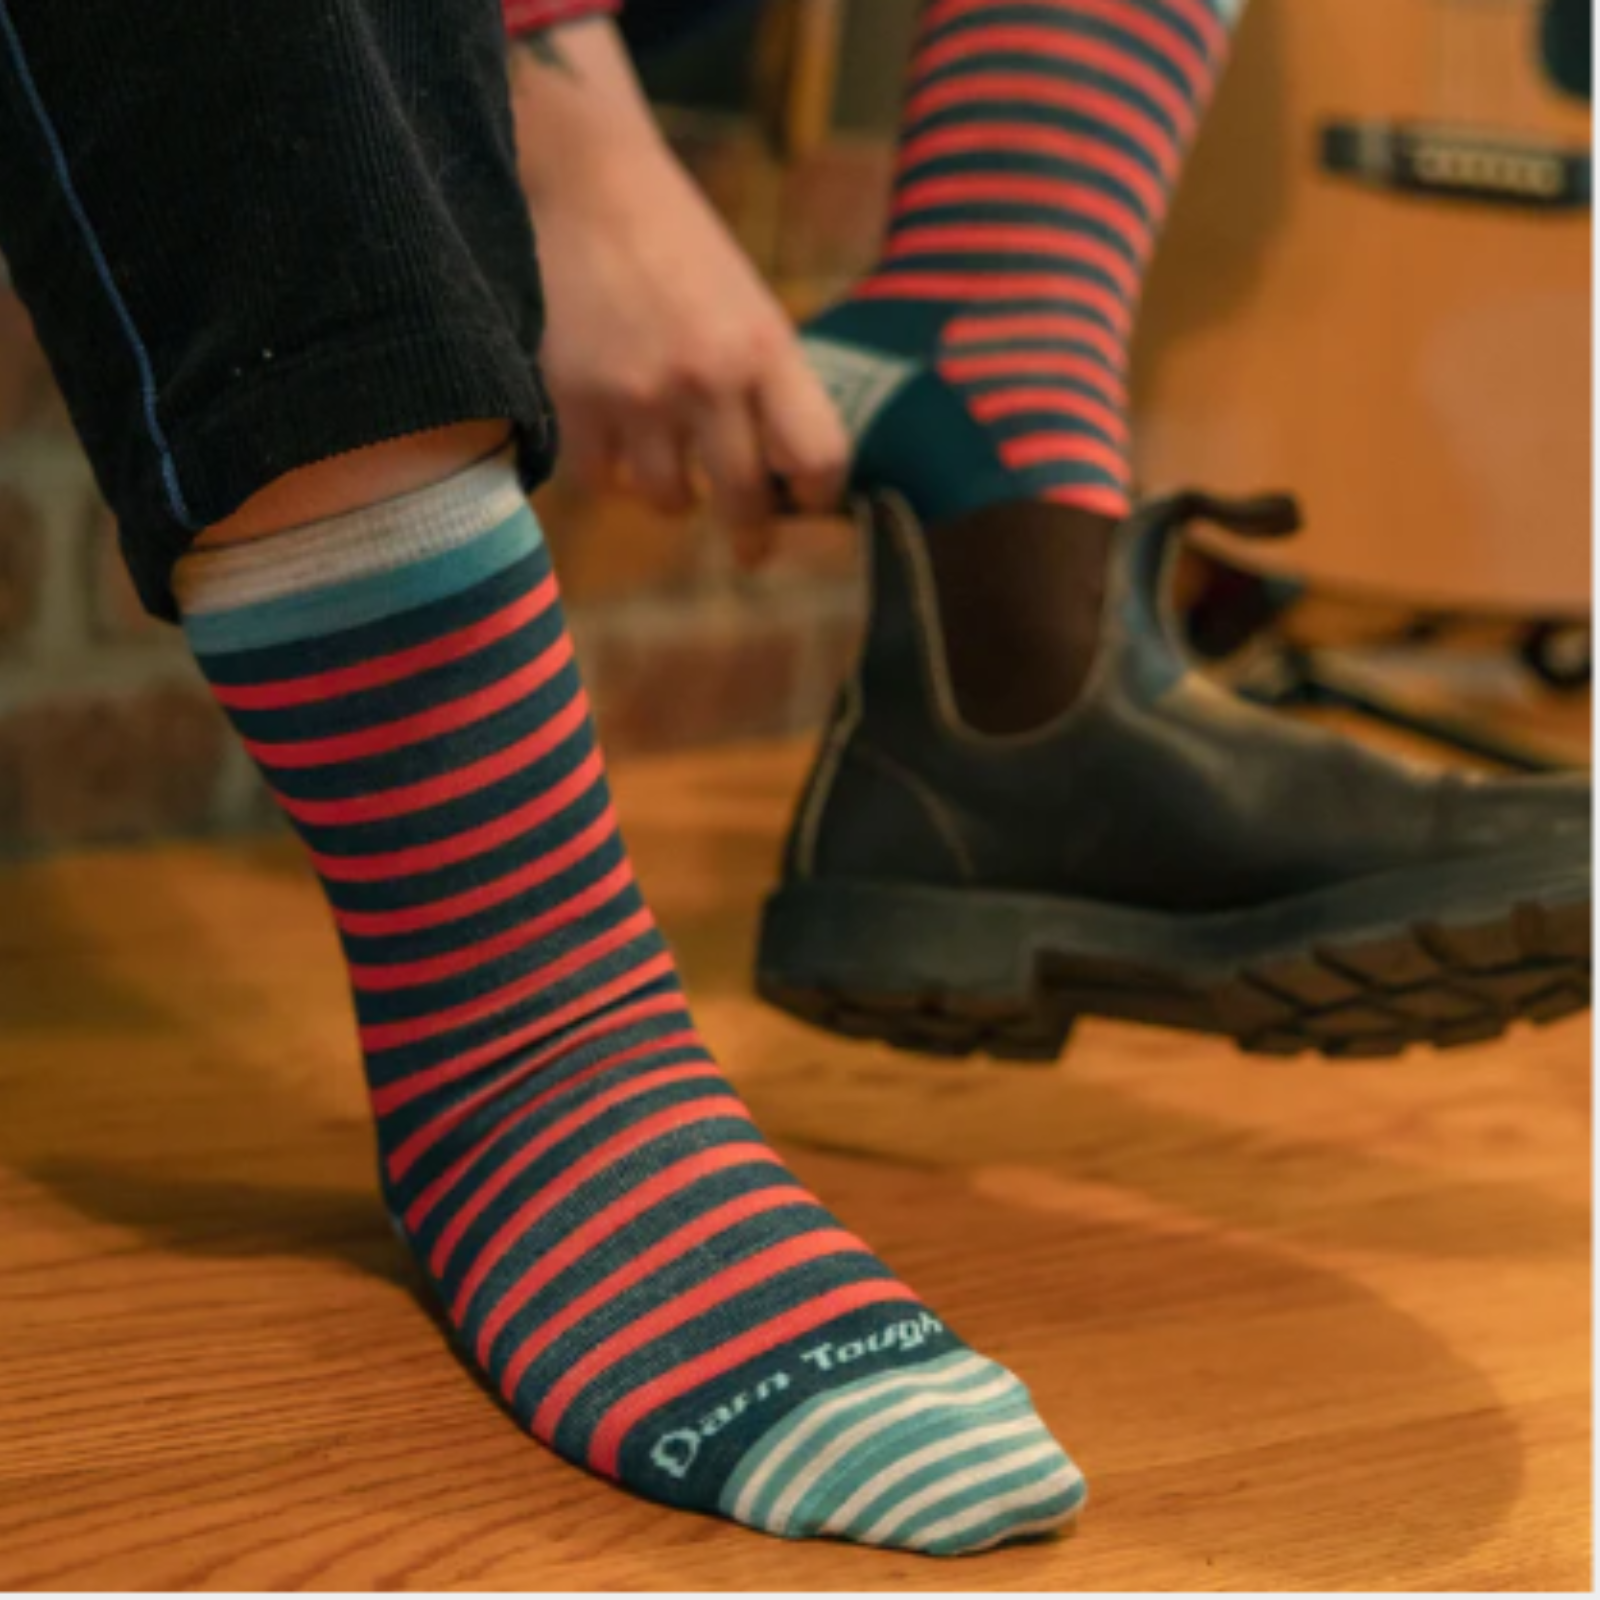 Darn Tough 6039 Morgan Lightweight Lifestyle Crew women's sock in teal featuring teal and pink stripes on a model putting on a boot